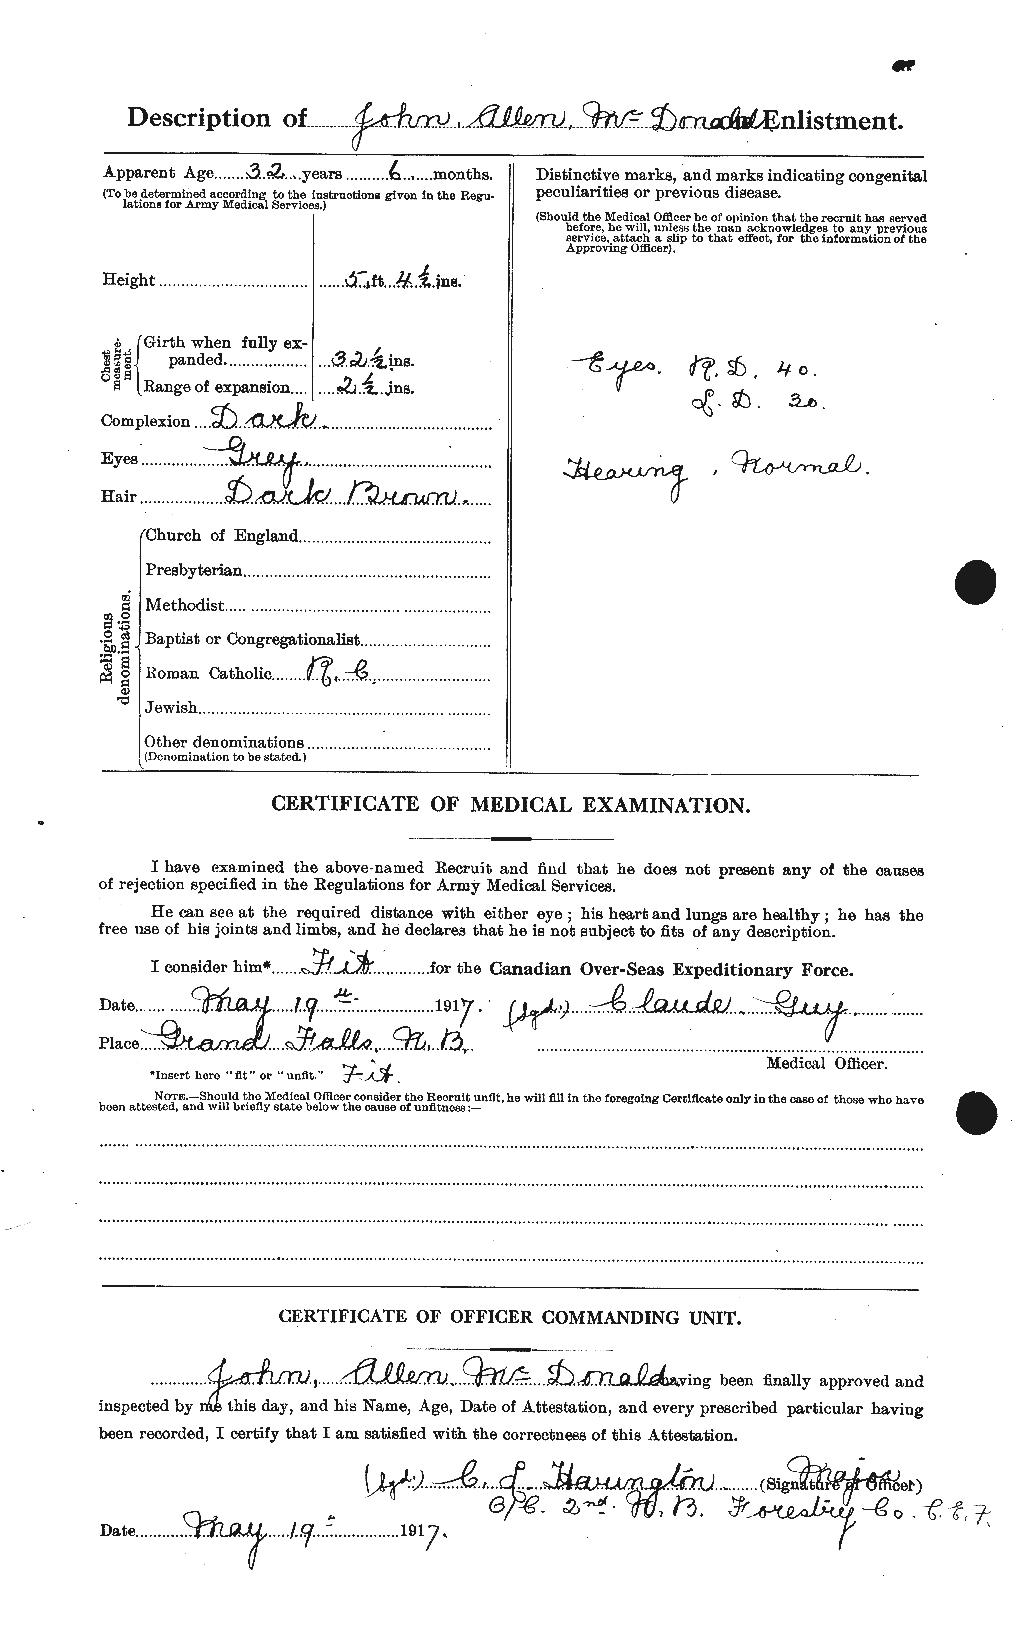 Personnel Records of the First World War - CEF 516521b